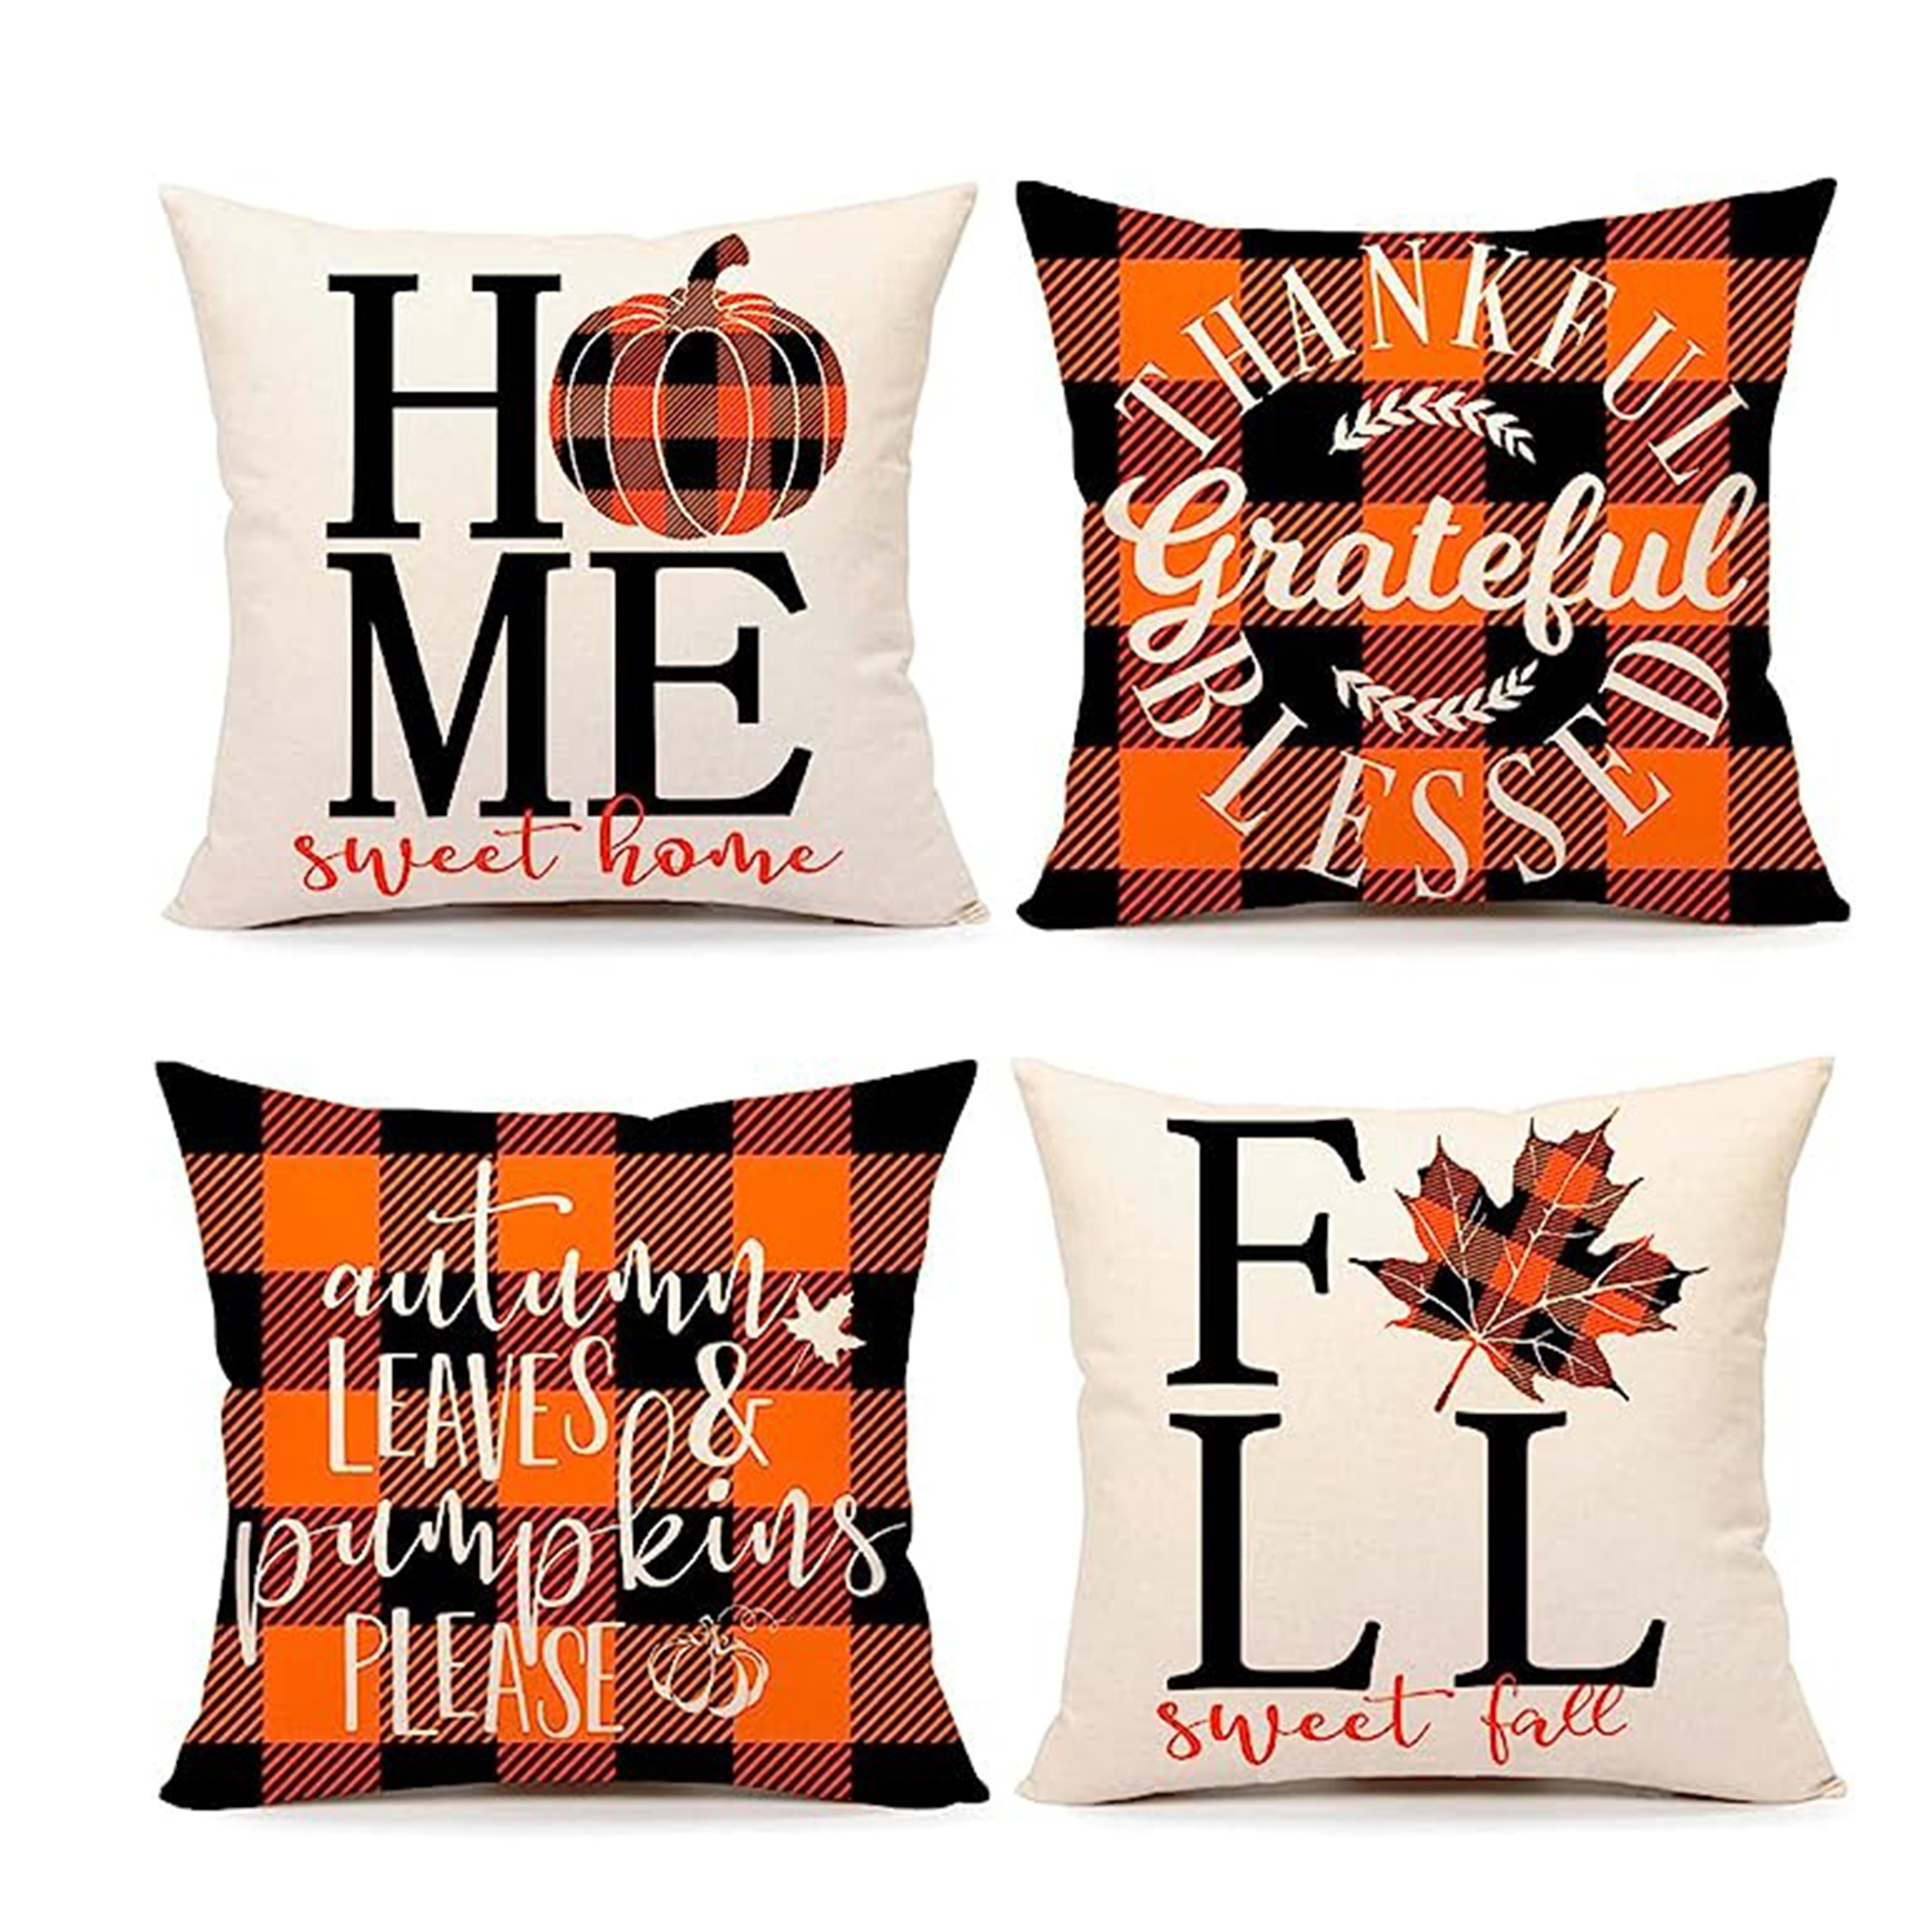 Throw Pillow Covers Set of 4 Decorative 20x20 Inch for Couch